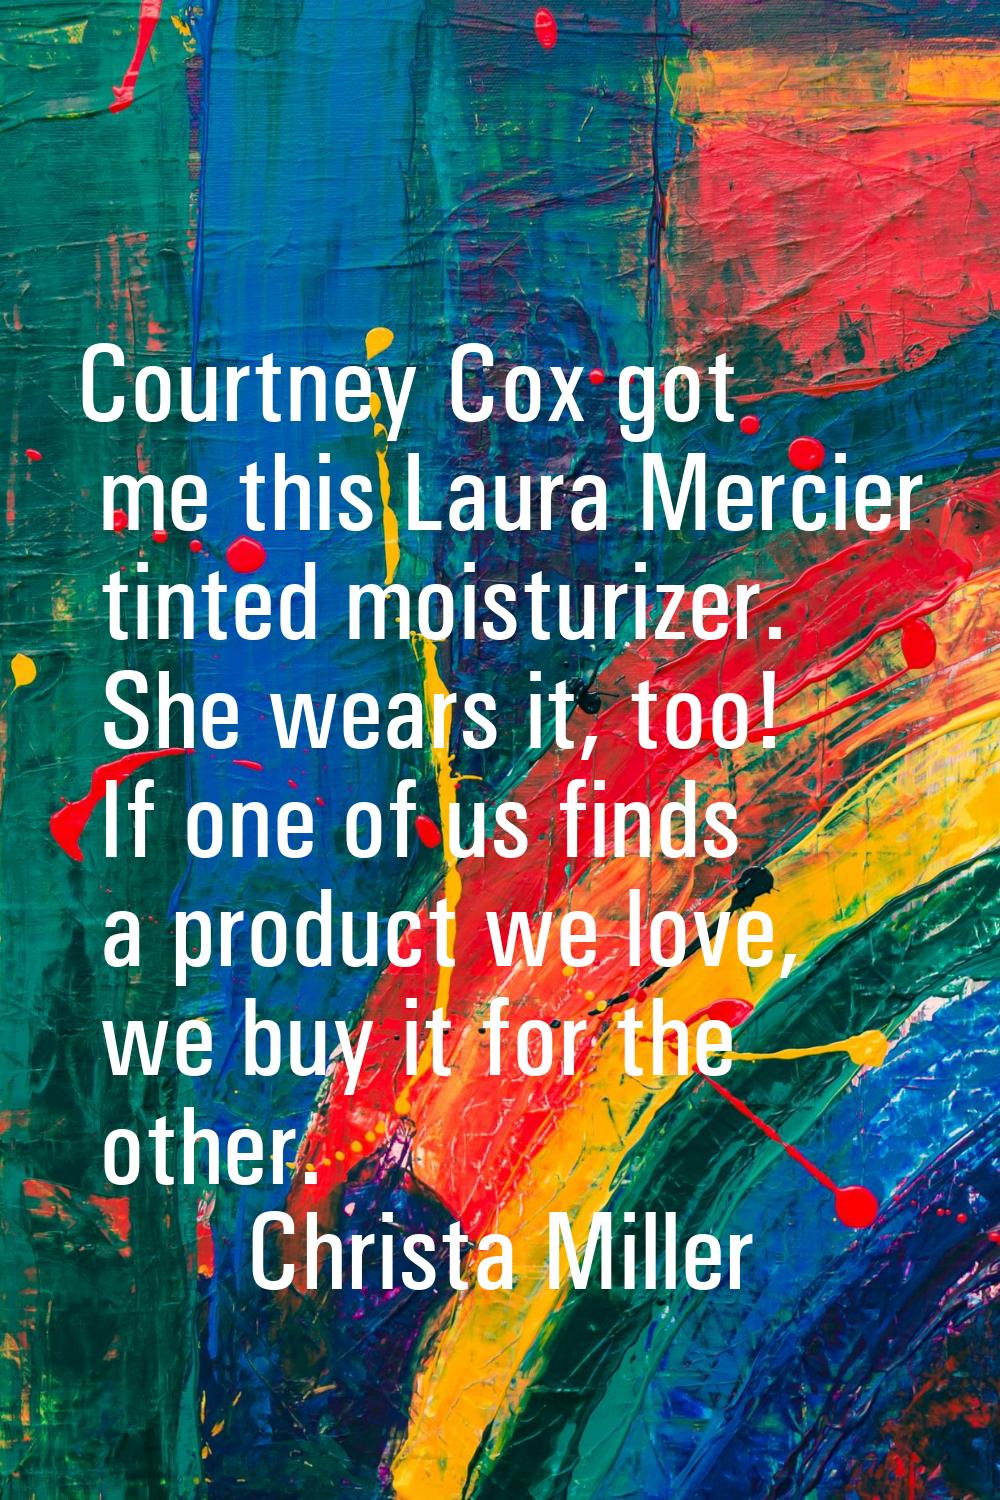 Courtney Cox got me this Laura Mercier tinted moisturizer. She wears it, too! If one of us finds a 